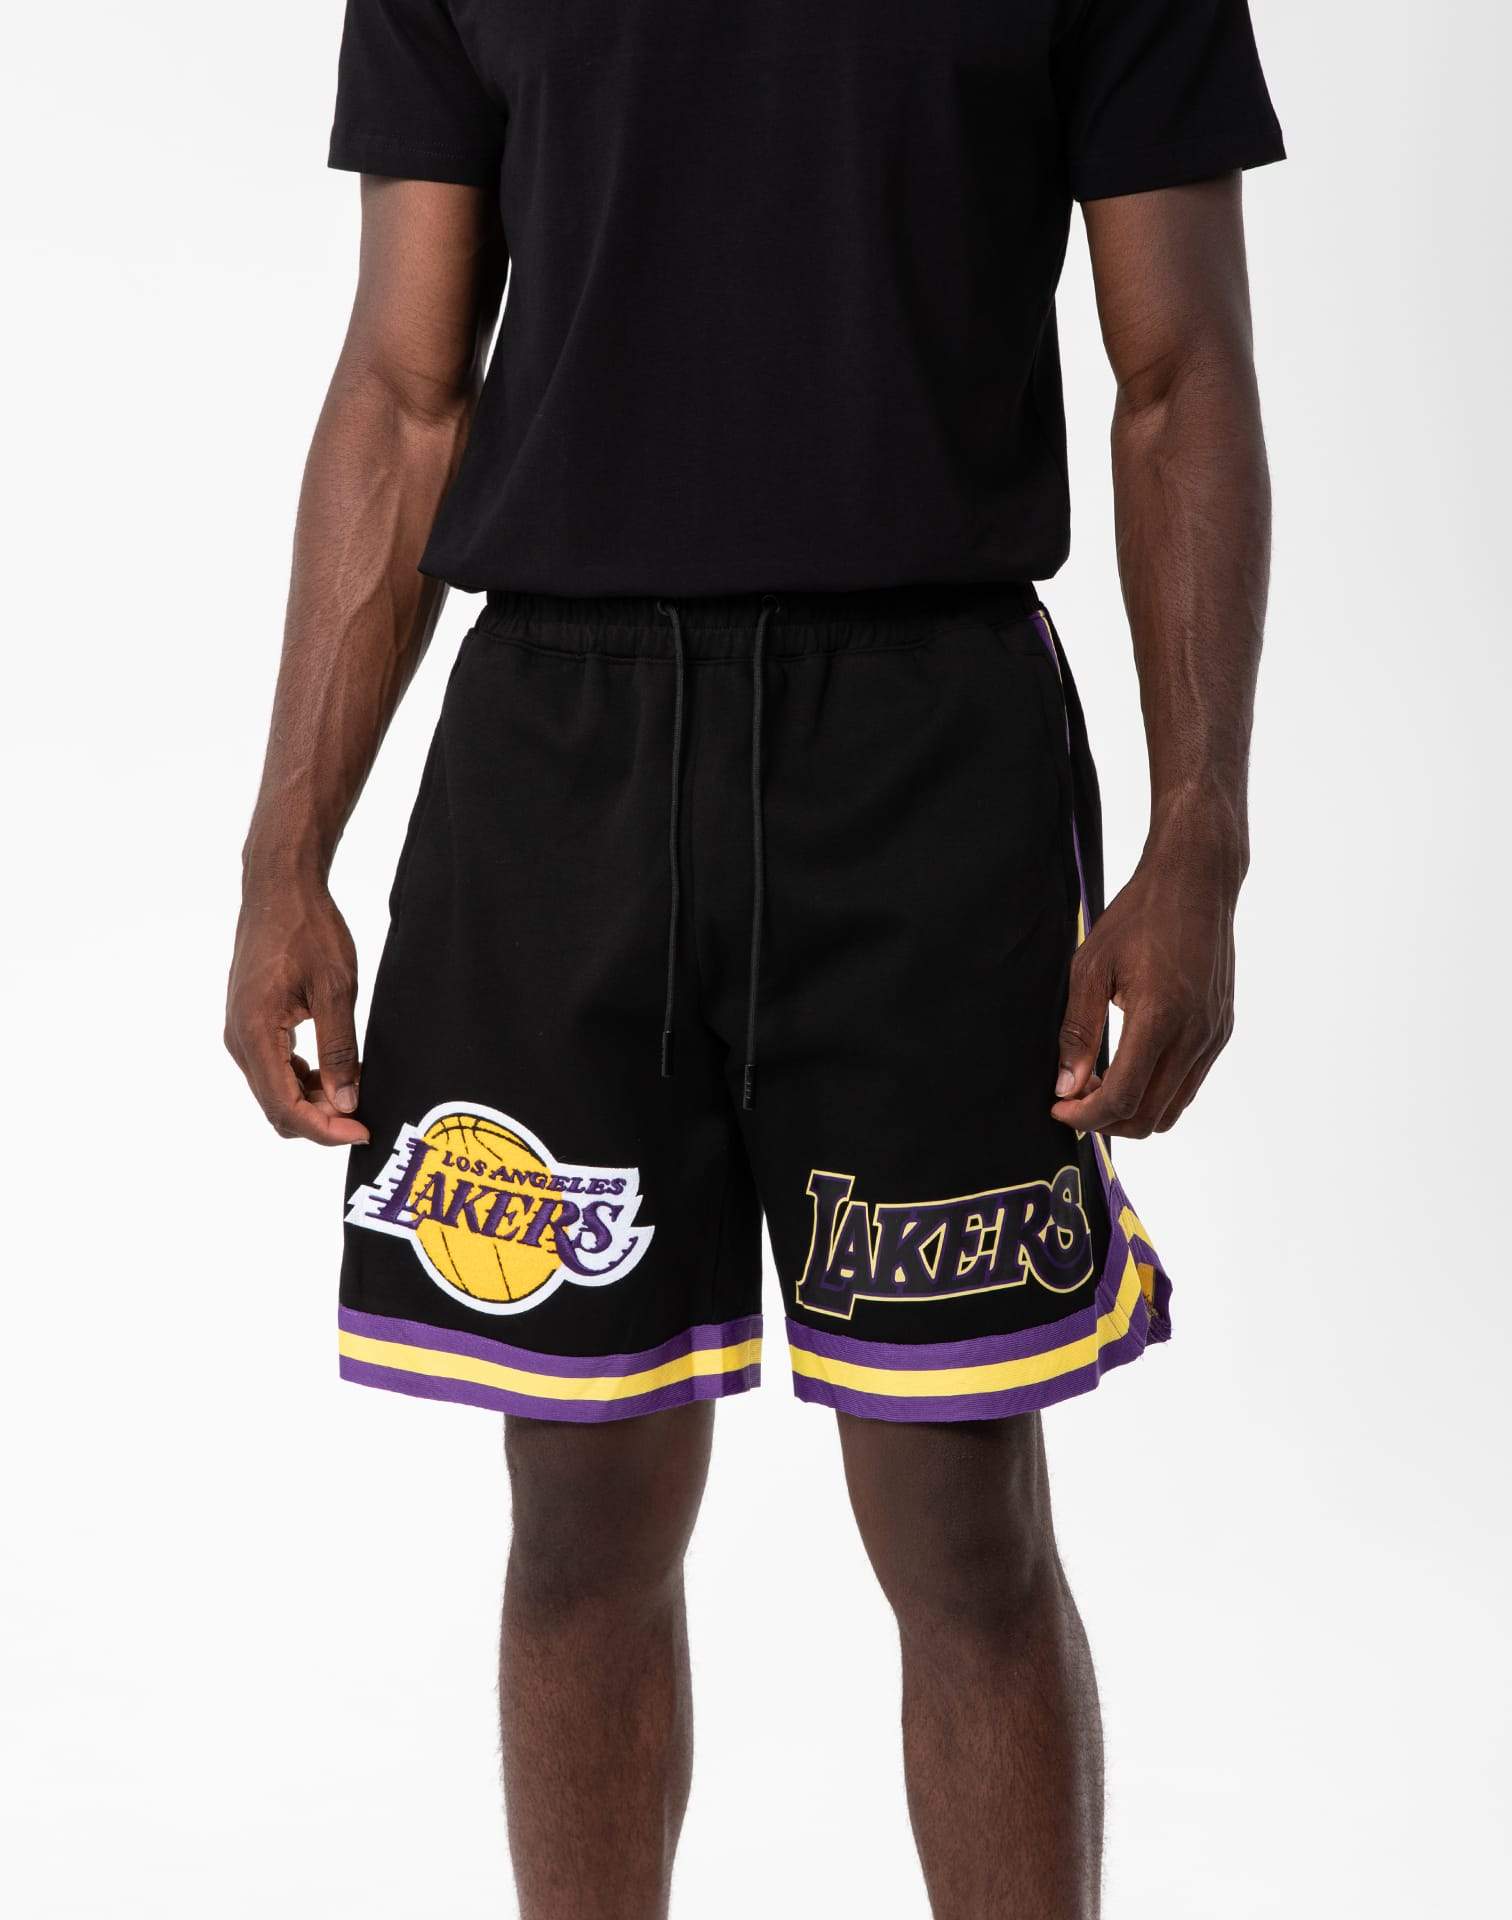 Shop Pro Standard Los Angeles Lakers Pro Team Shorts BLL351639-YLW